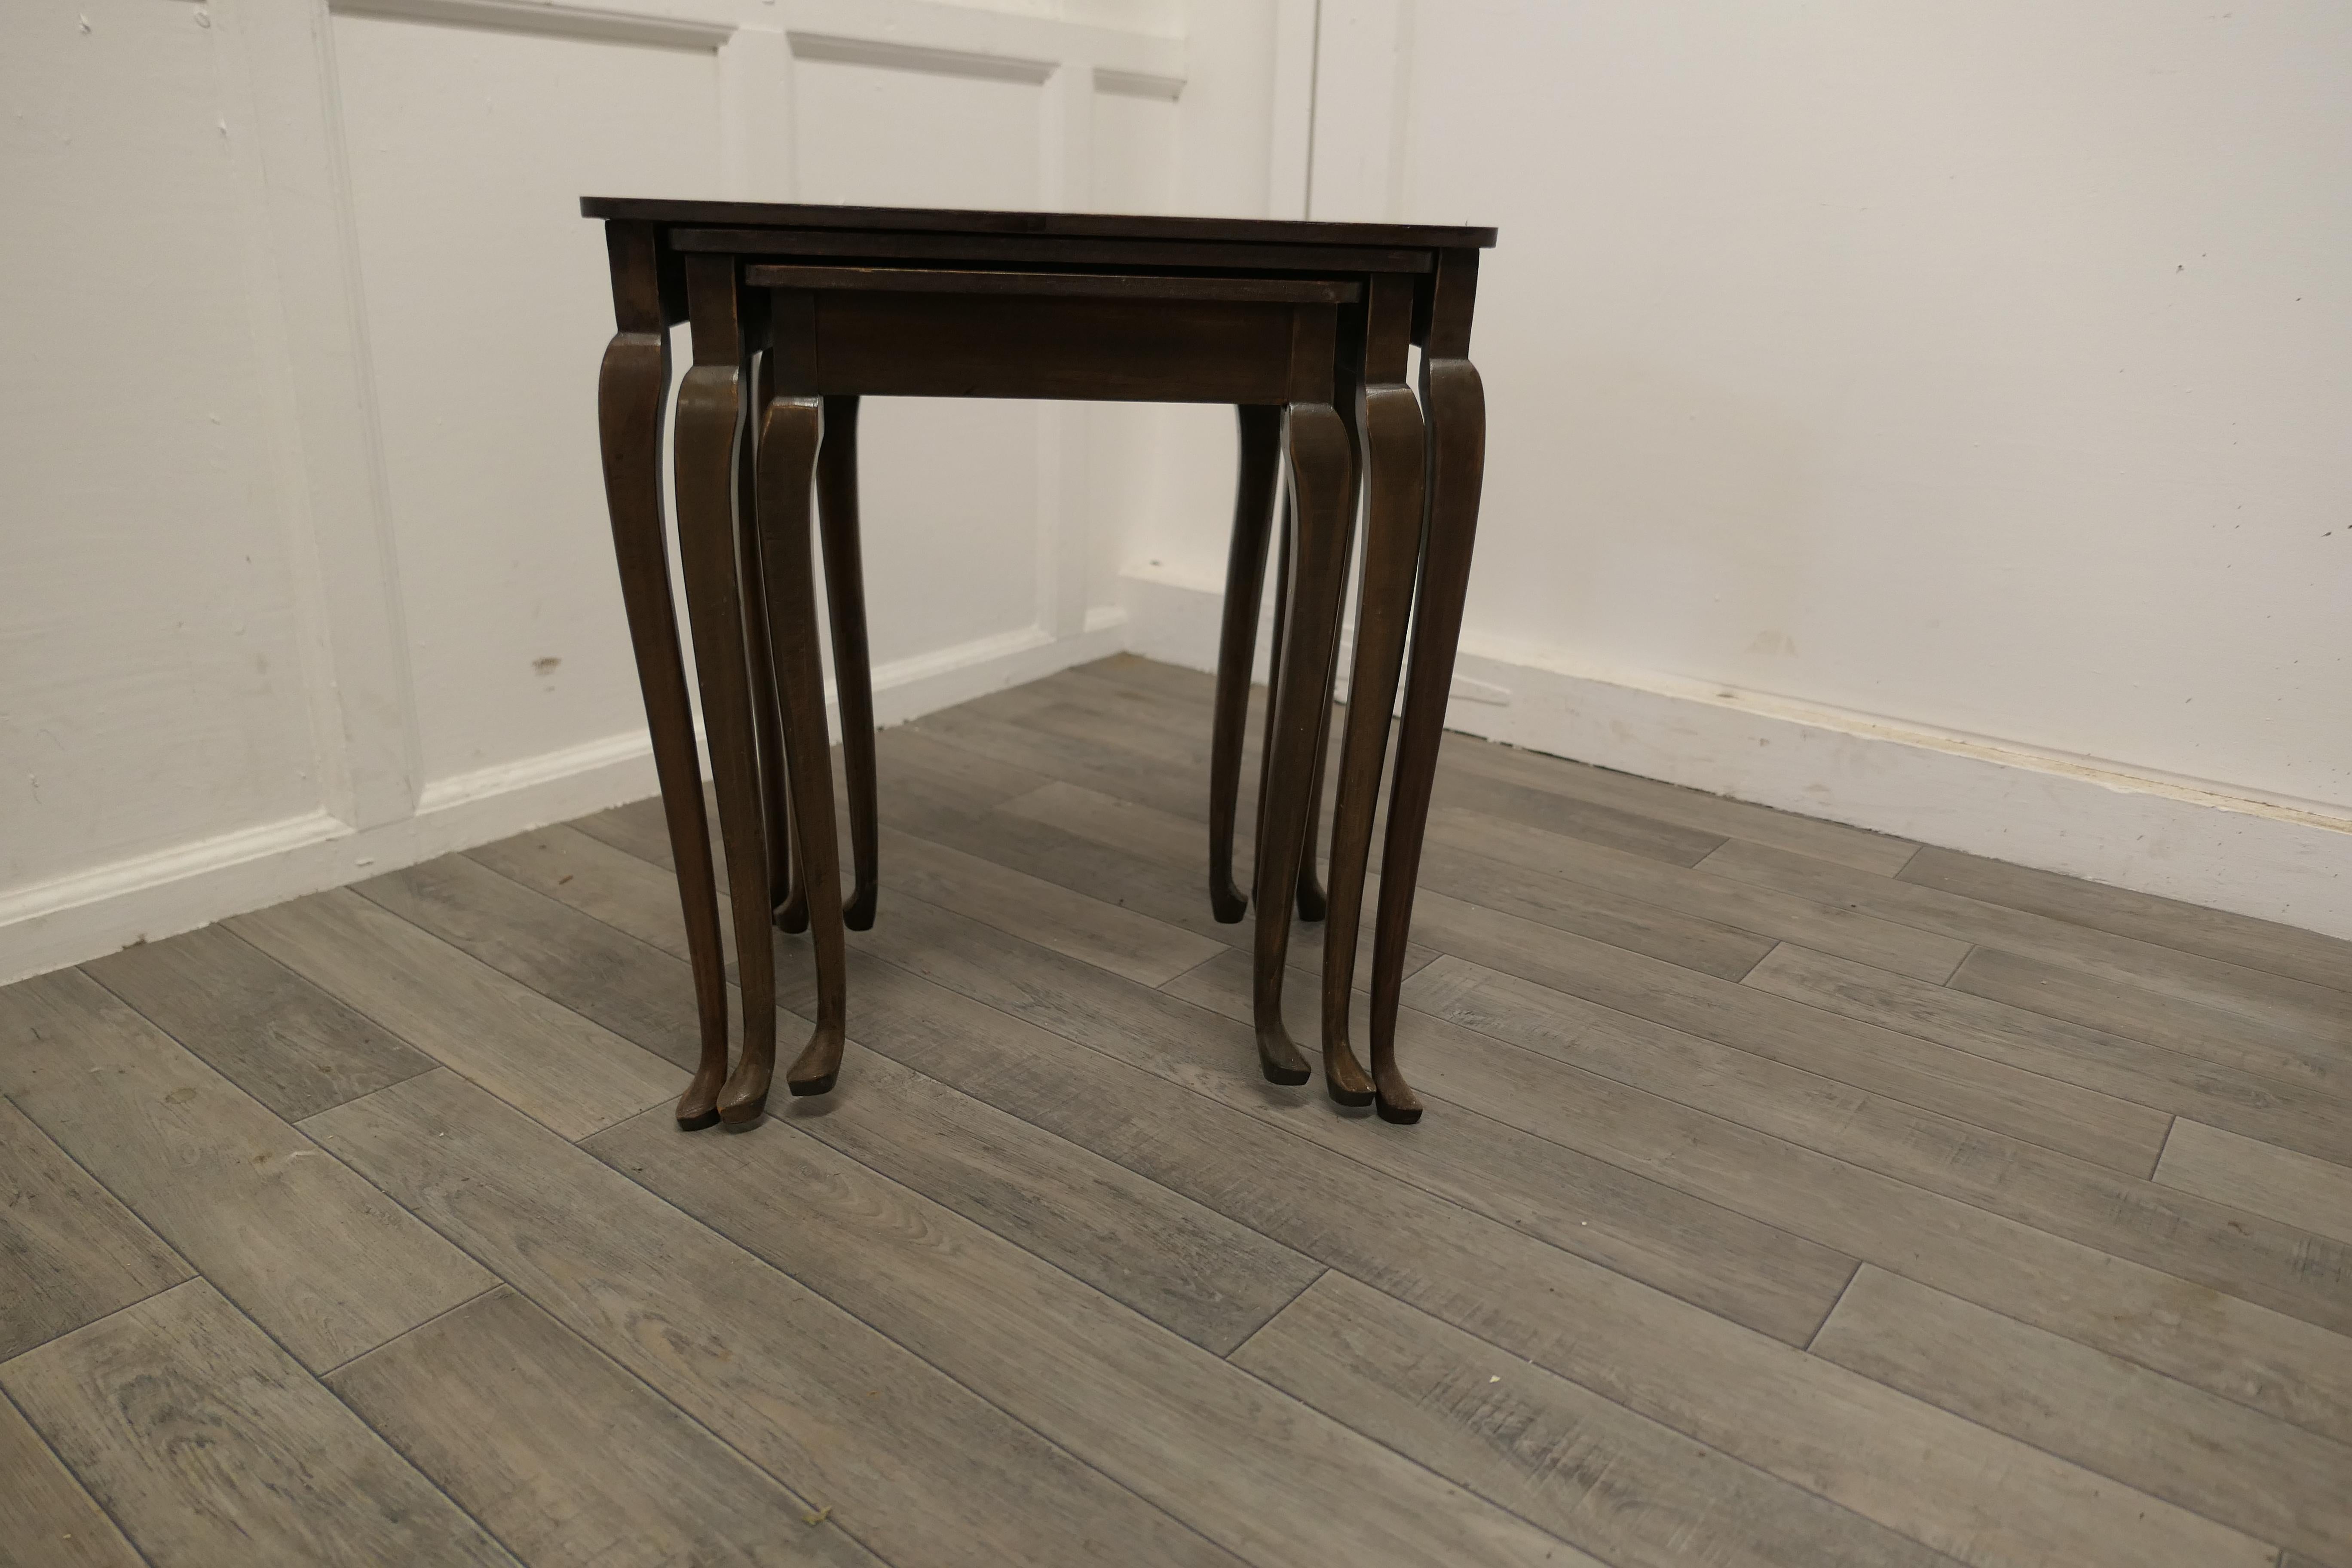 Nest of Three Walnut Art Deco Tables

This is an attractive set of tables, the nest is a set of 3 walnut quarter veneered tables with slender cabriole legs
The tables are sound and in good condition 
As with all Nests of Tables they increase in